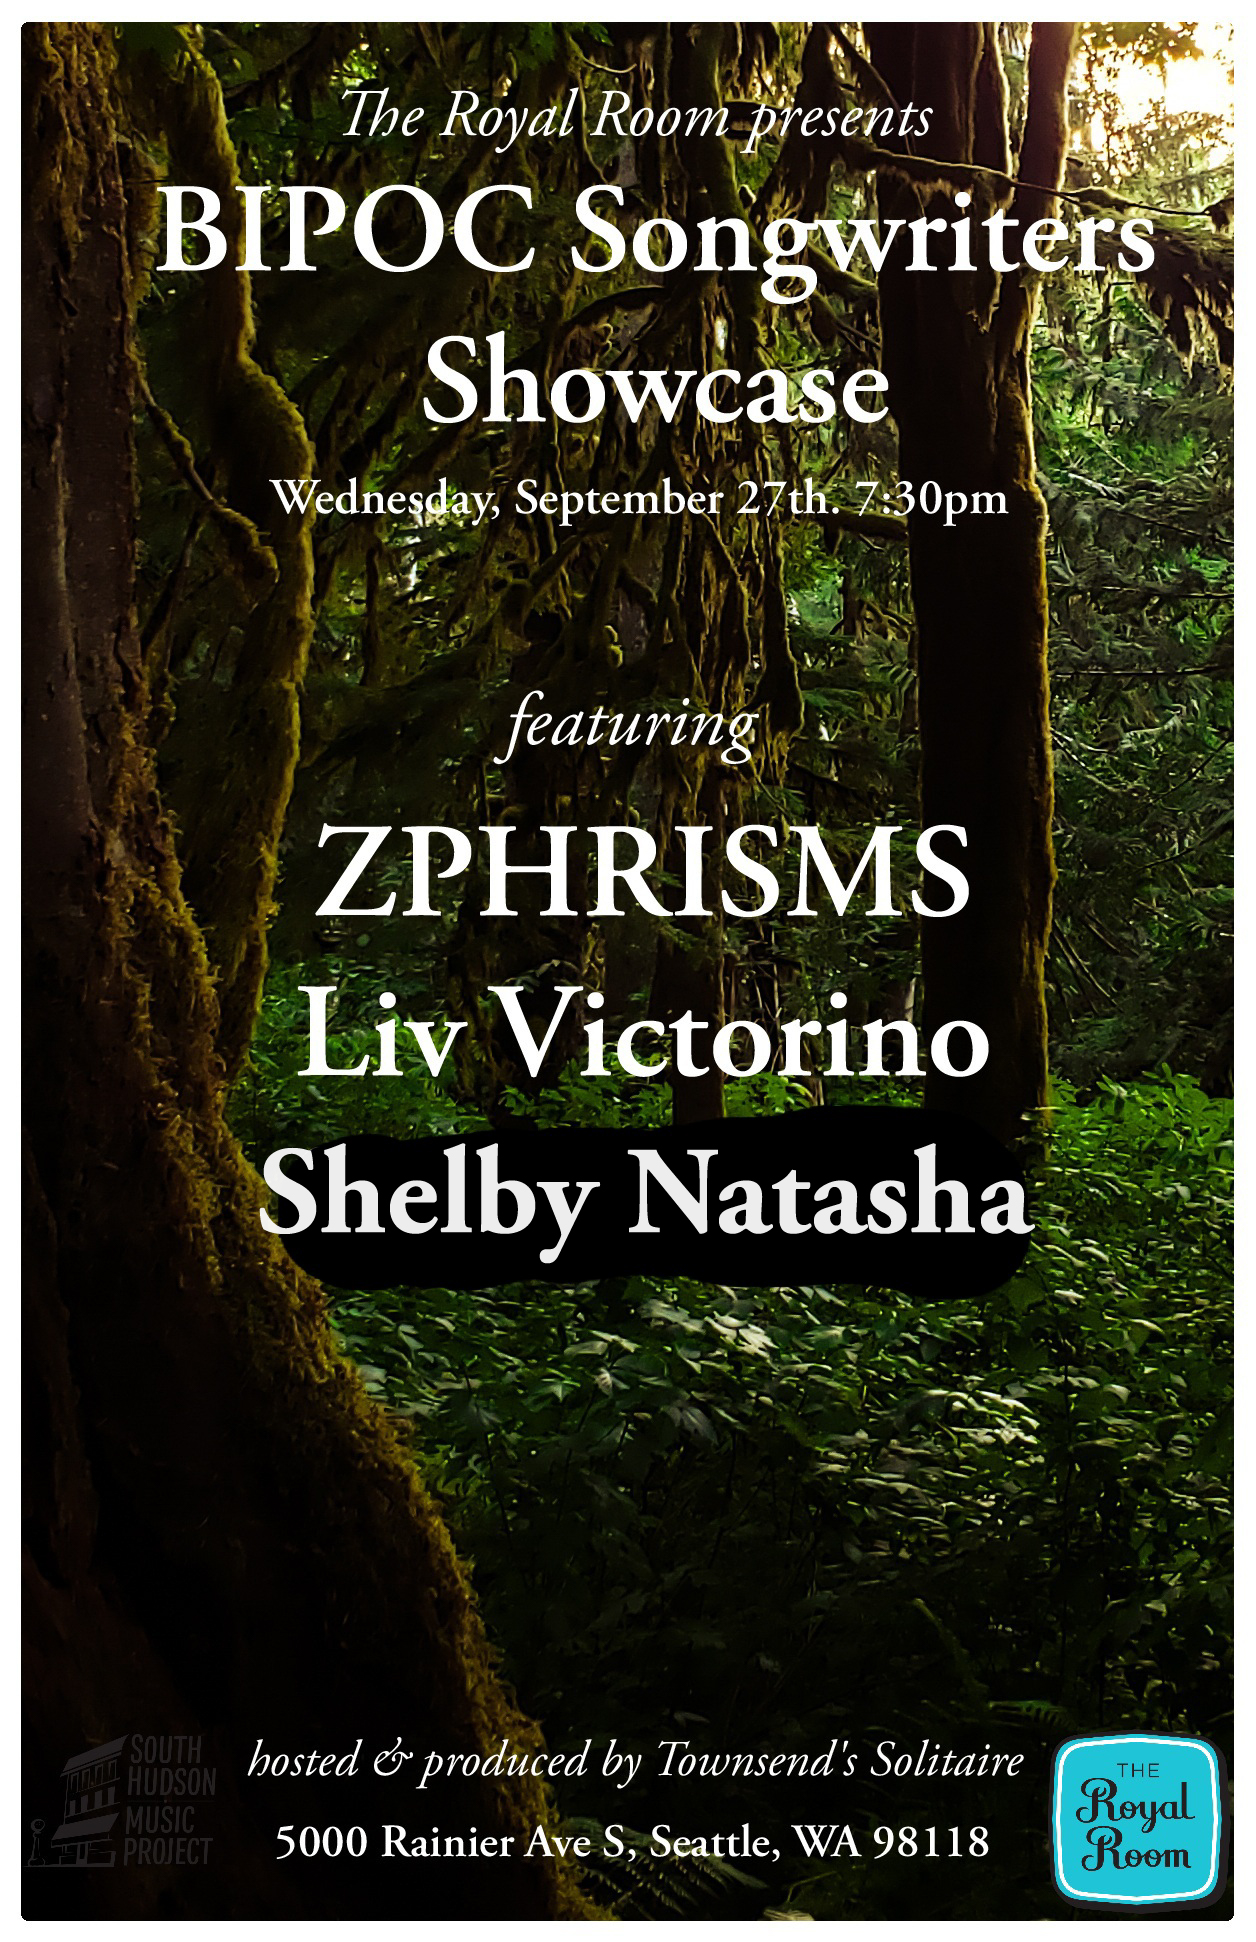 BIPOC Songwriters Showcase featuring ZHPHRISMS, Liv Victorino, and Shelby Natasha